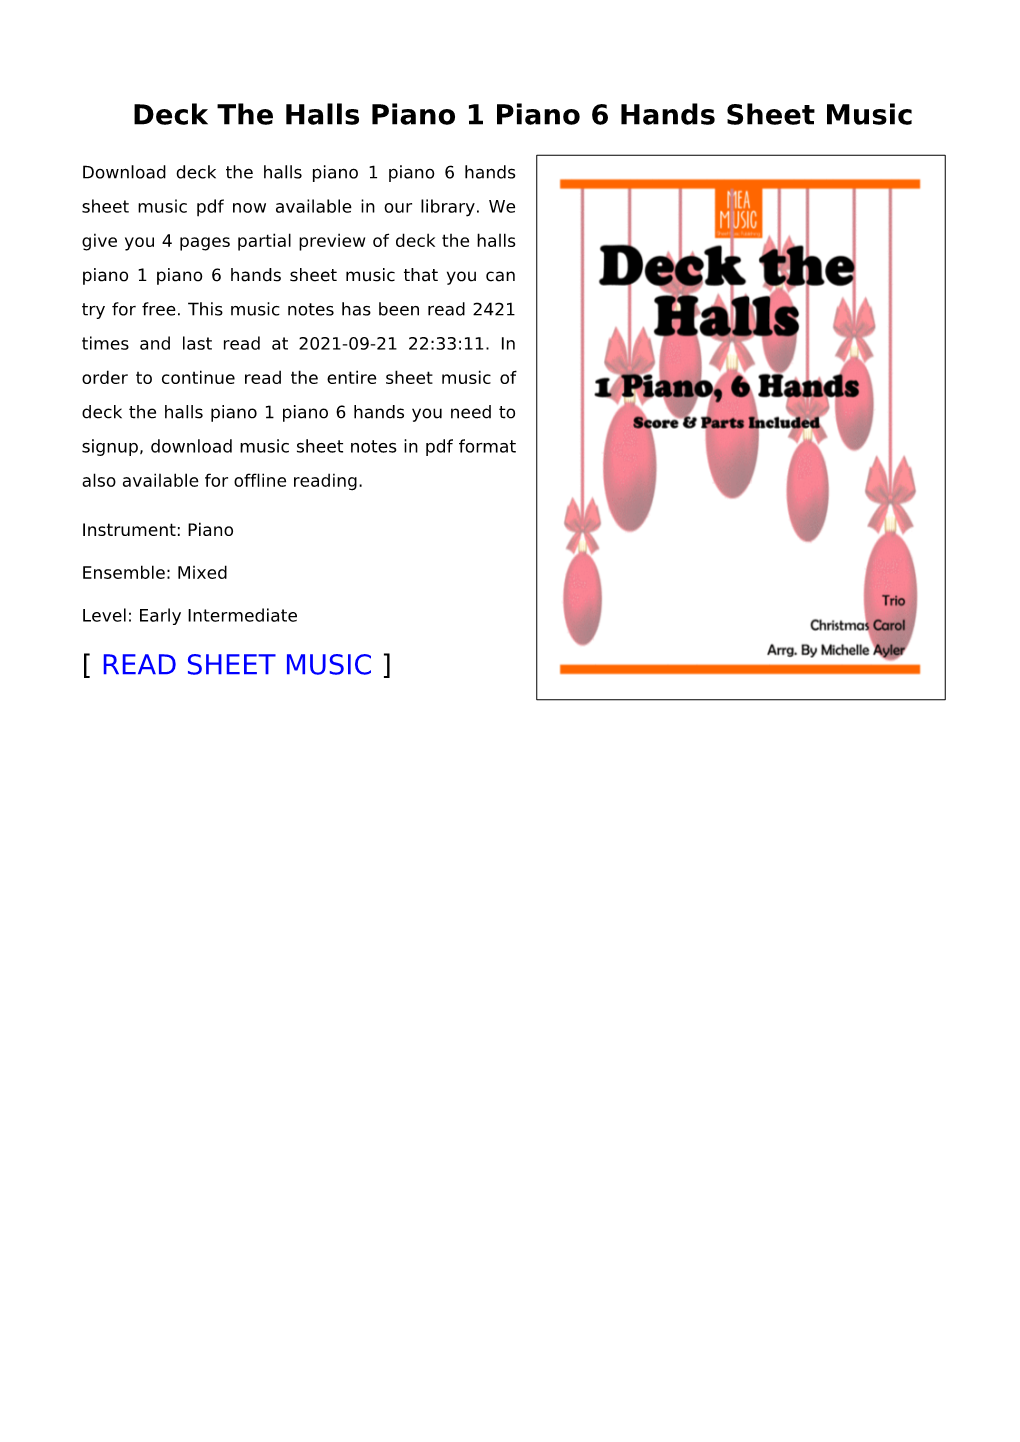 Deck the Halls Piano 1 Piano 6 Hands Sheet Music